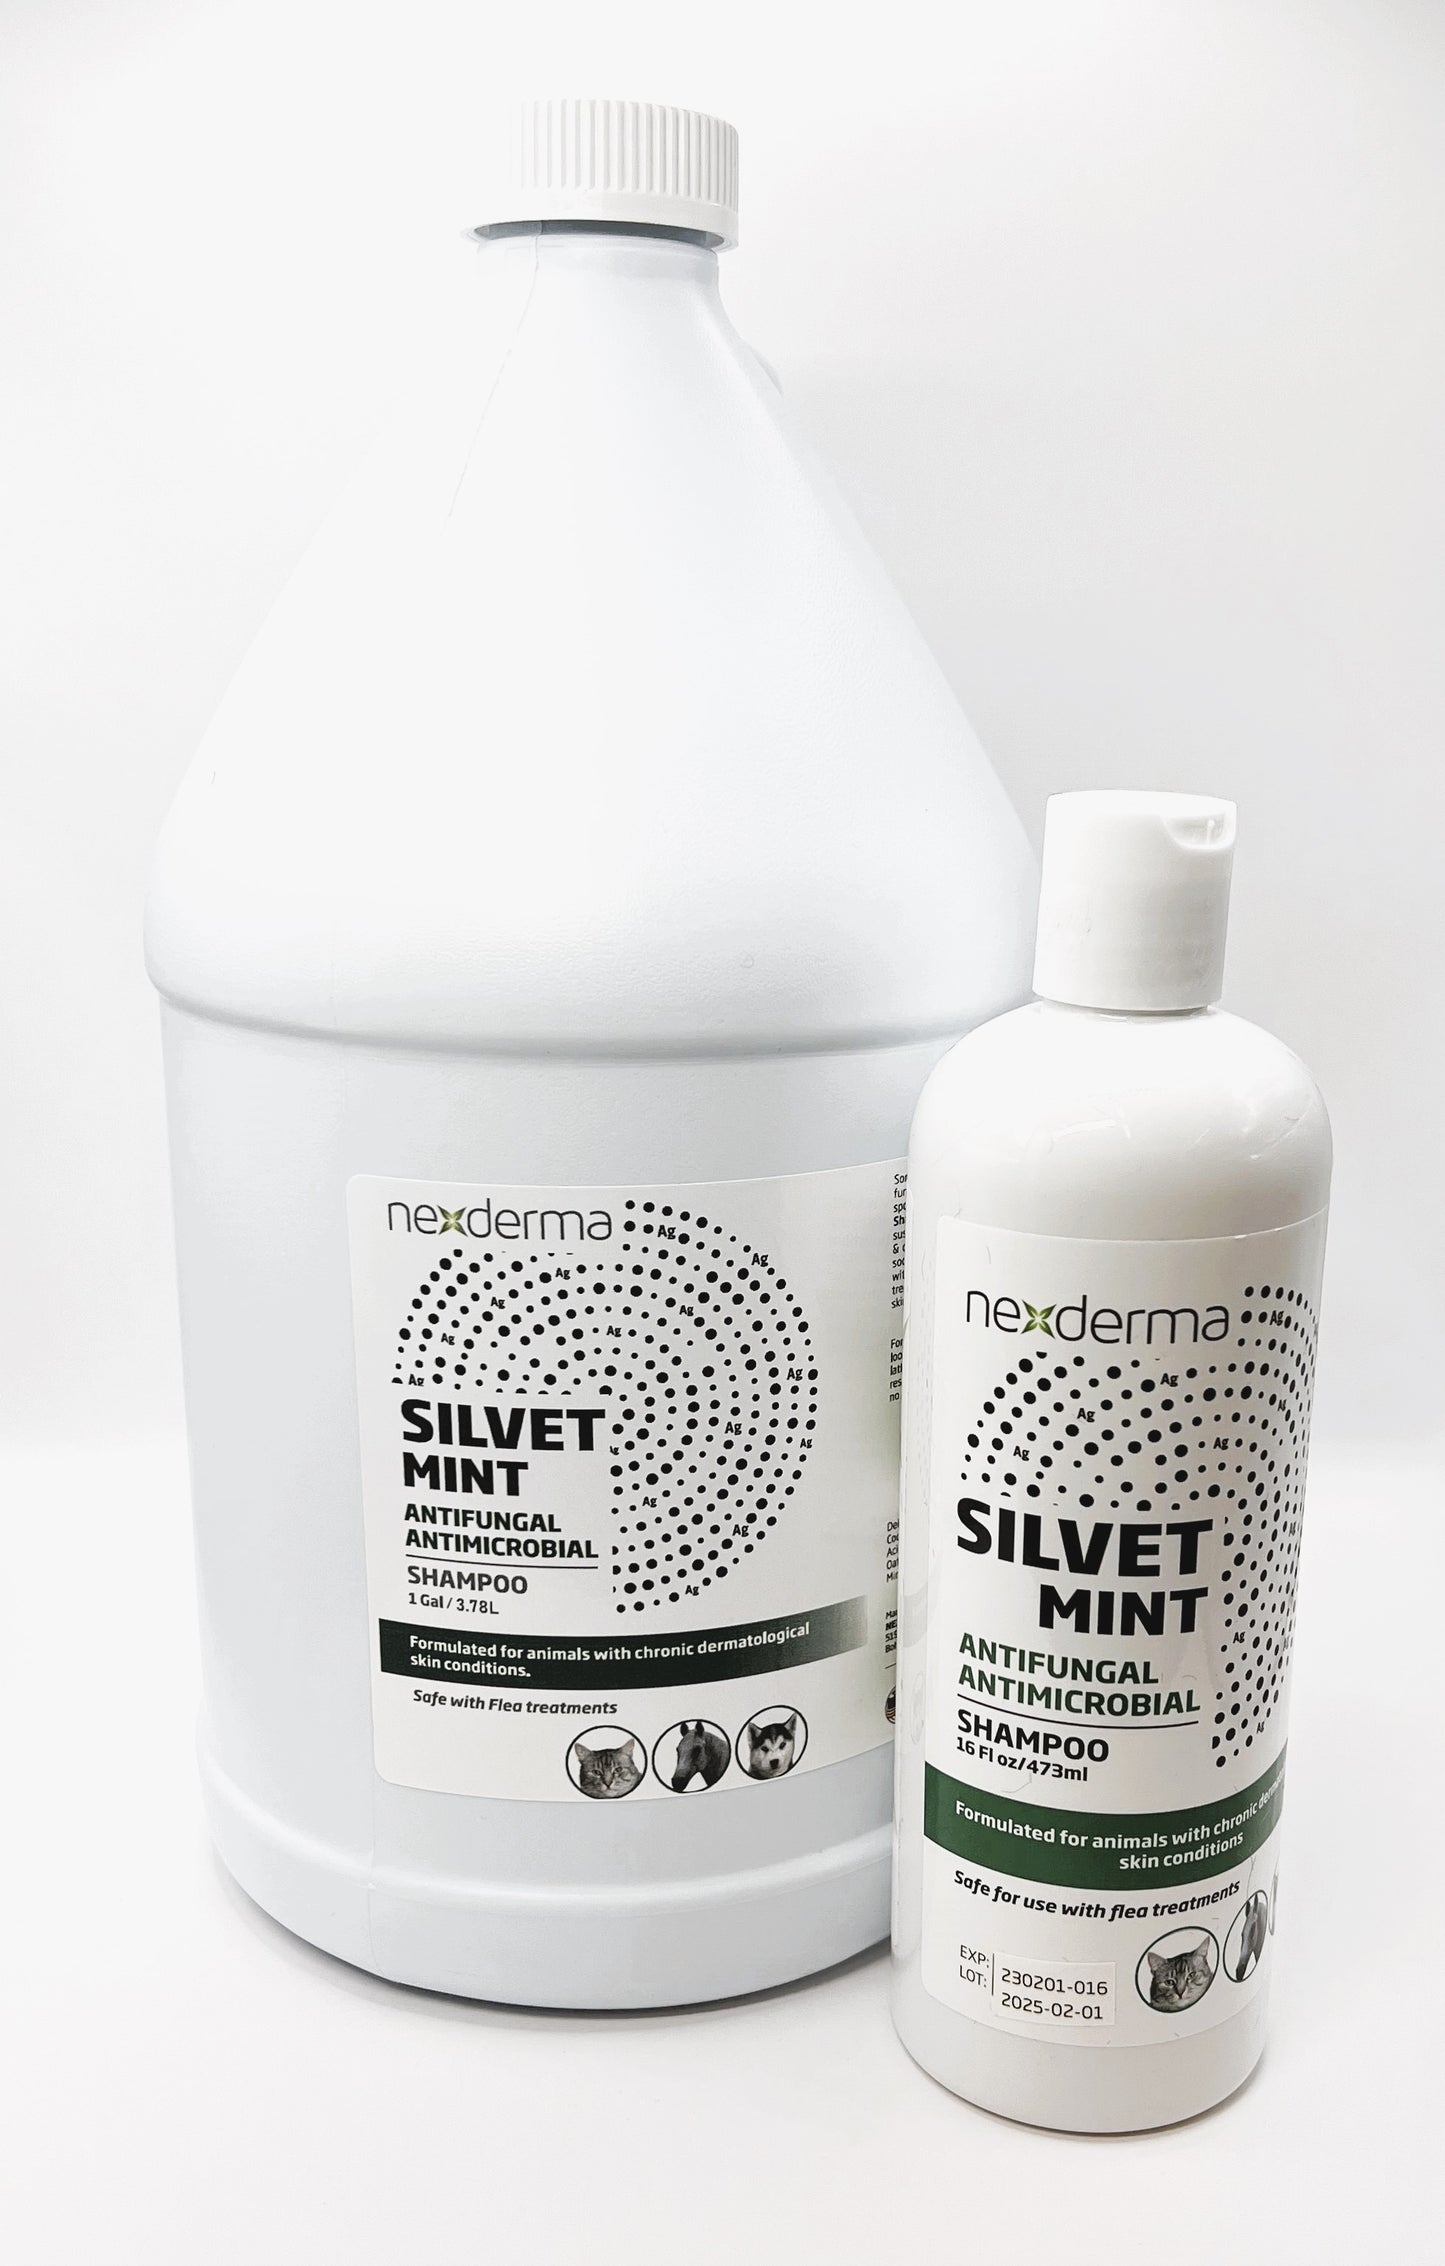 Nexderma's Silvet Antifungal-Antimicrobial Pet Shampoo contains Colloidal Nano  Silver suspended in our Stem-Gel based proprietary formula. This advanced product supports healthy skin and coat, relieving pain, itching, swelling and stinging, while clinically proven to speed up healing of common skin conditions. 